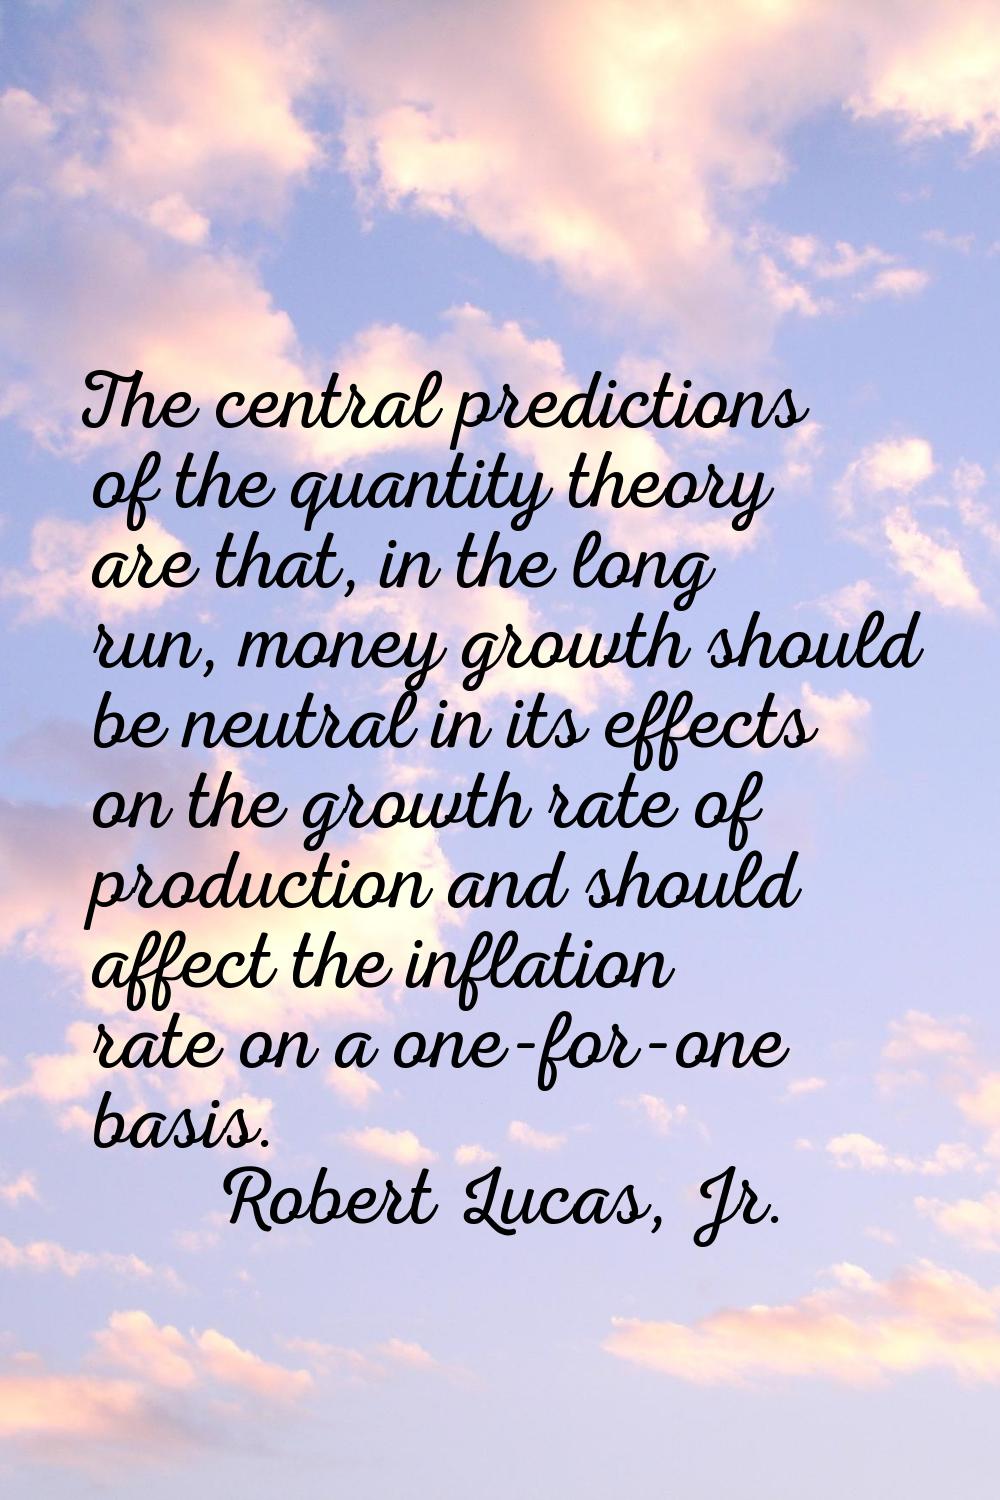 The central predictions of the quantity theory are that, in the long run, money growth should be ne